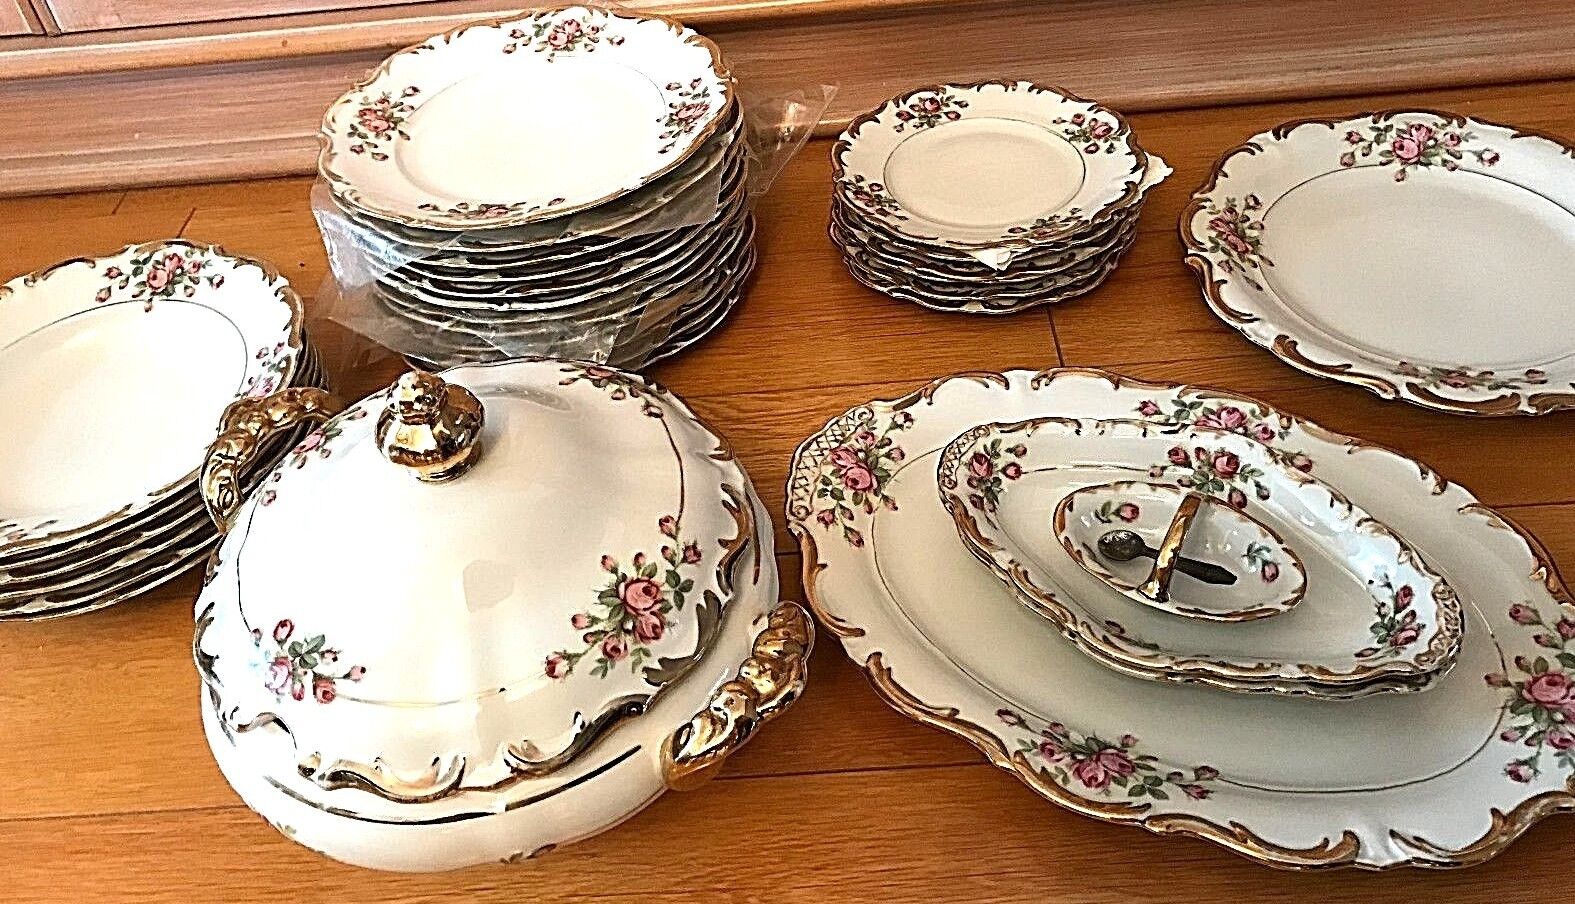 Winterling Germany Bavaria Serving Plate Set 30 pc Vintage Collectable China 100